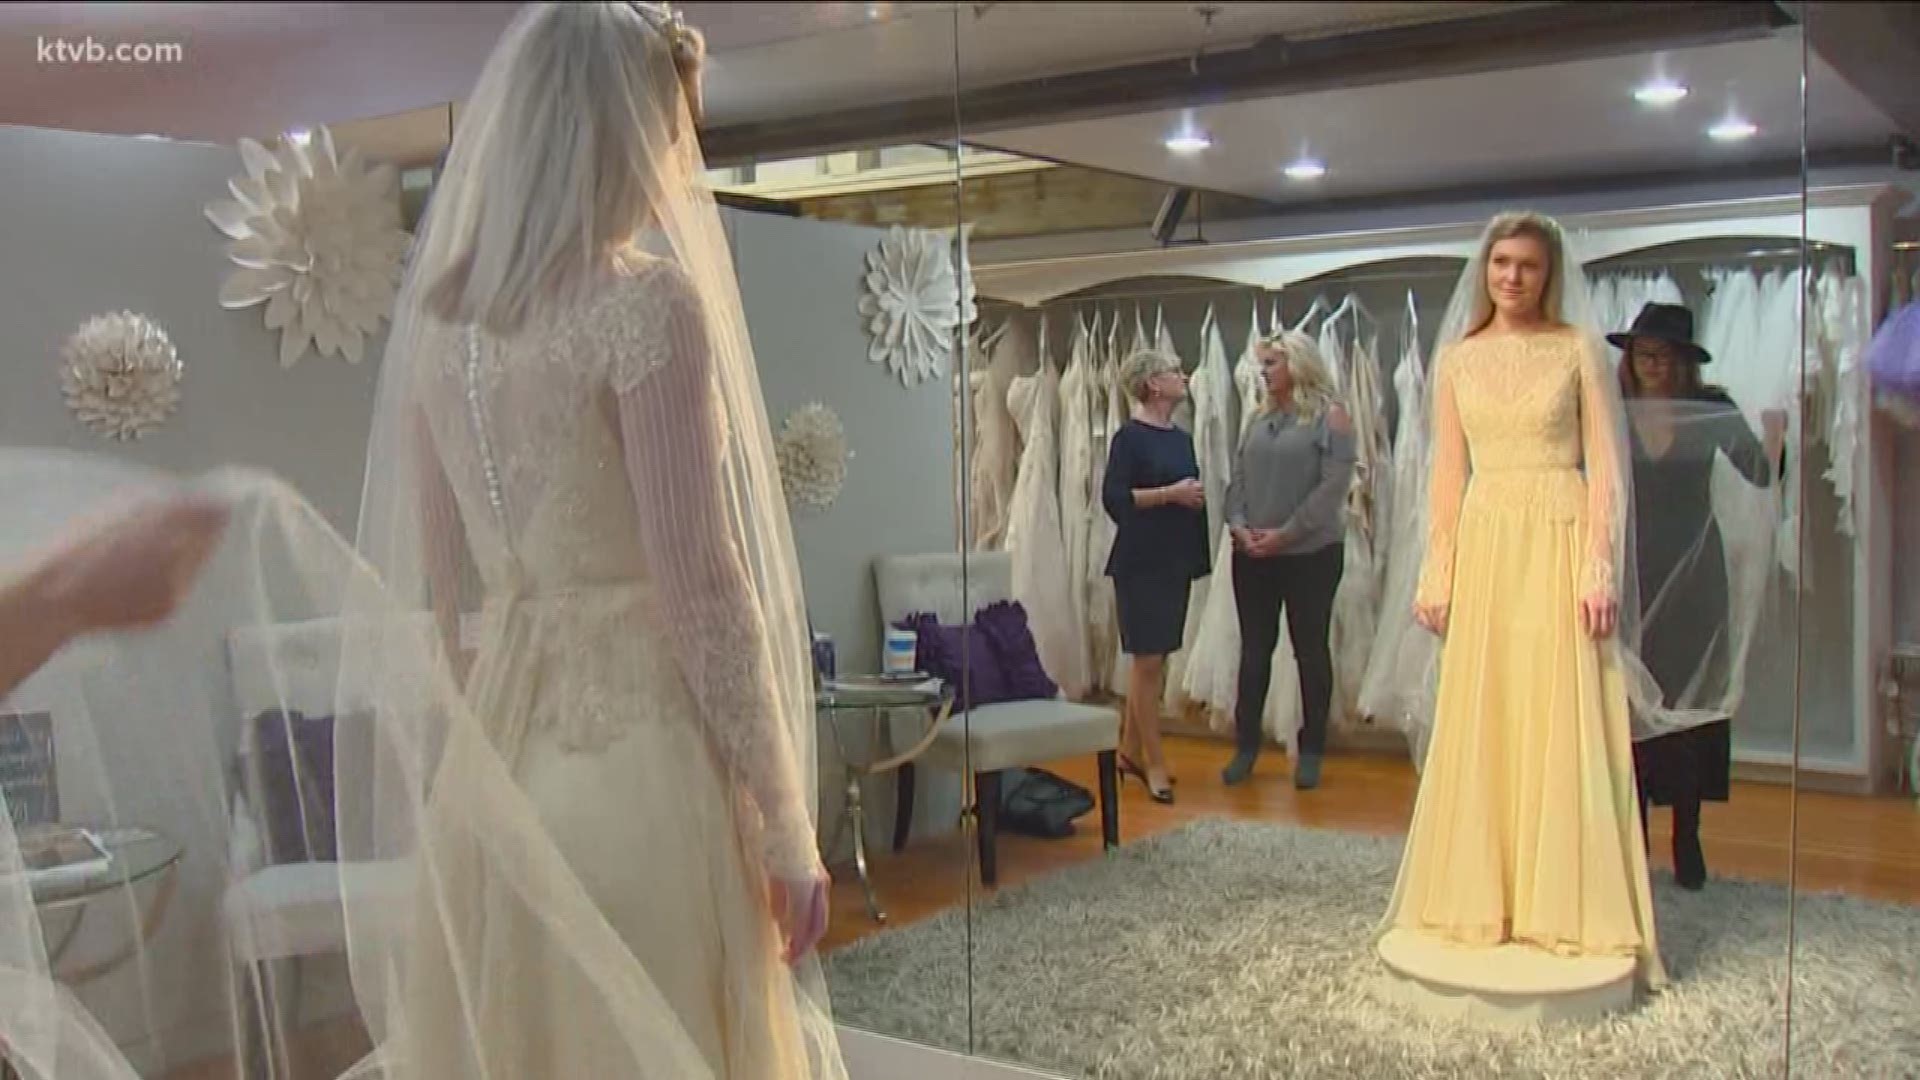 Dee Sarton finds out what makes these DACI gowns so popular.